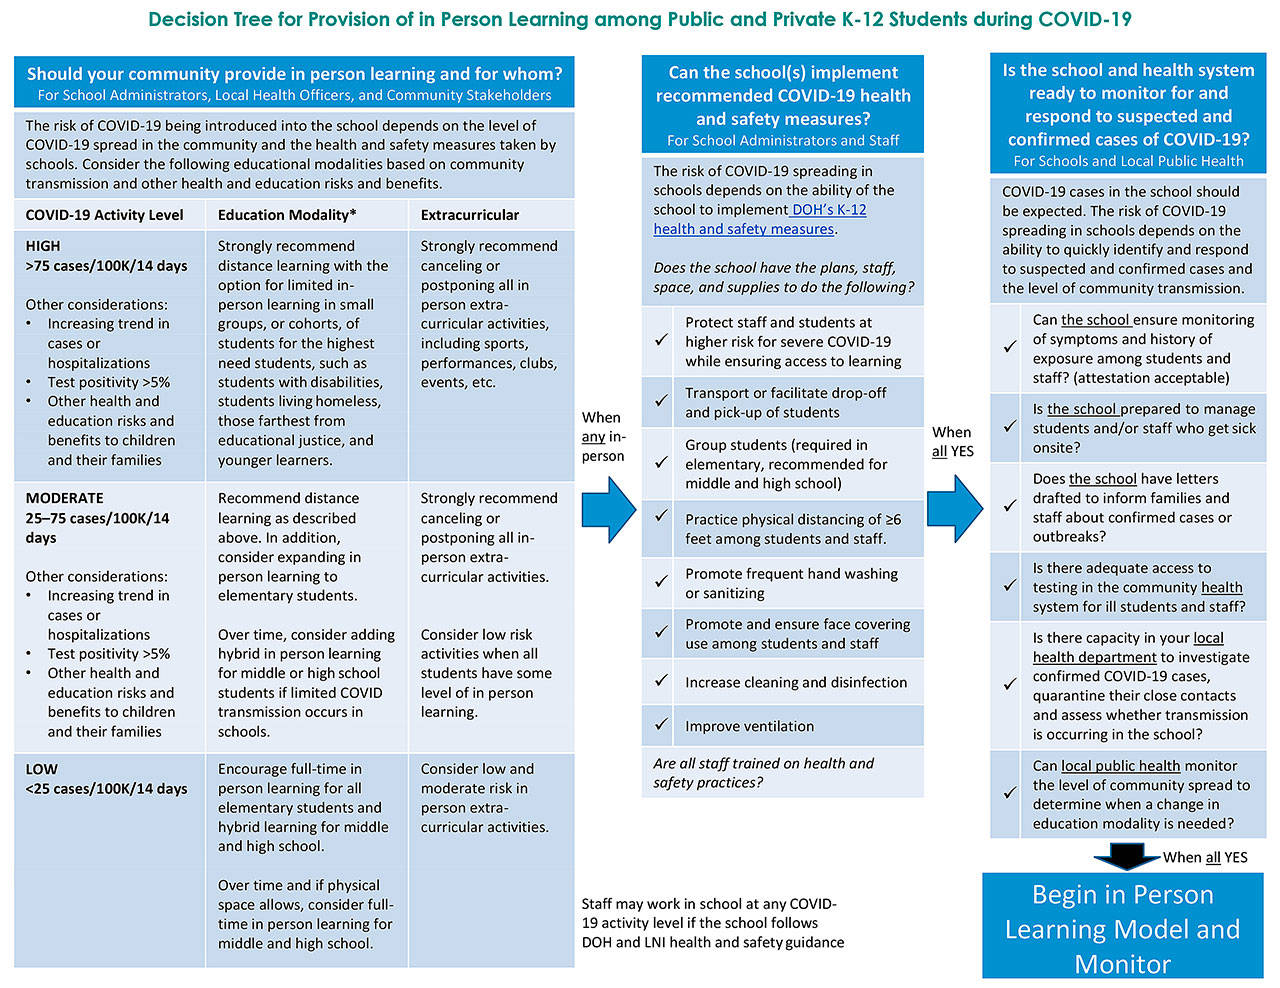 STATE DEPARTMENT OF HEALTHThe state Department of Health "Decision Tree" for resuming on-site learning at K-12 schools.